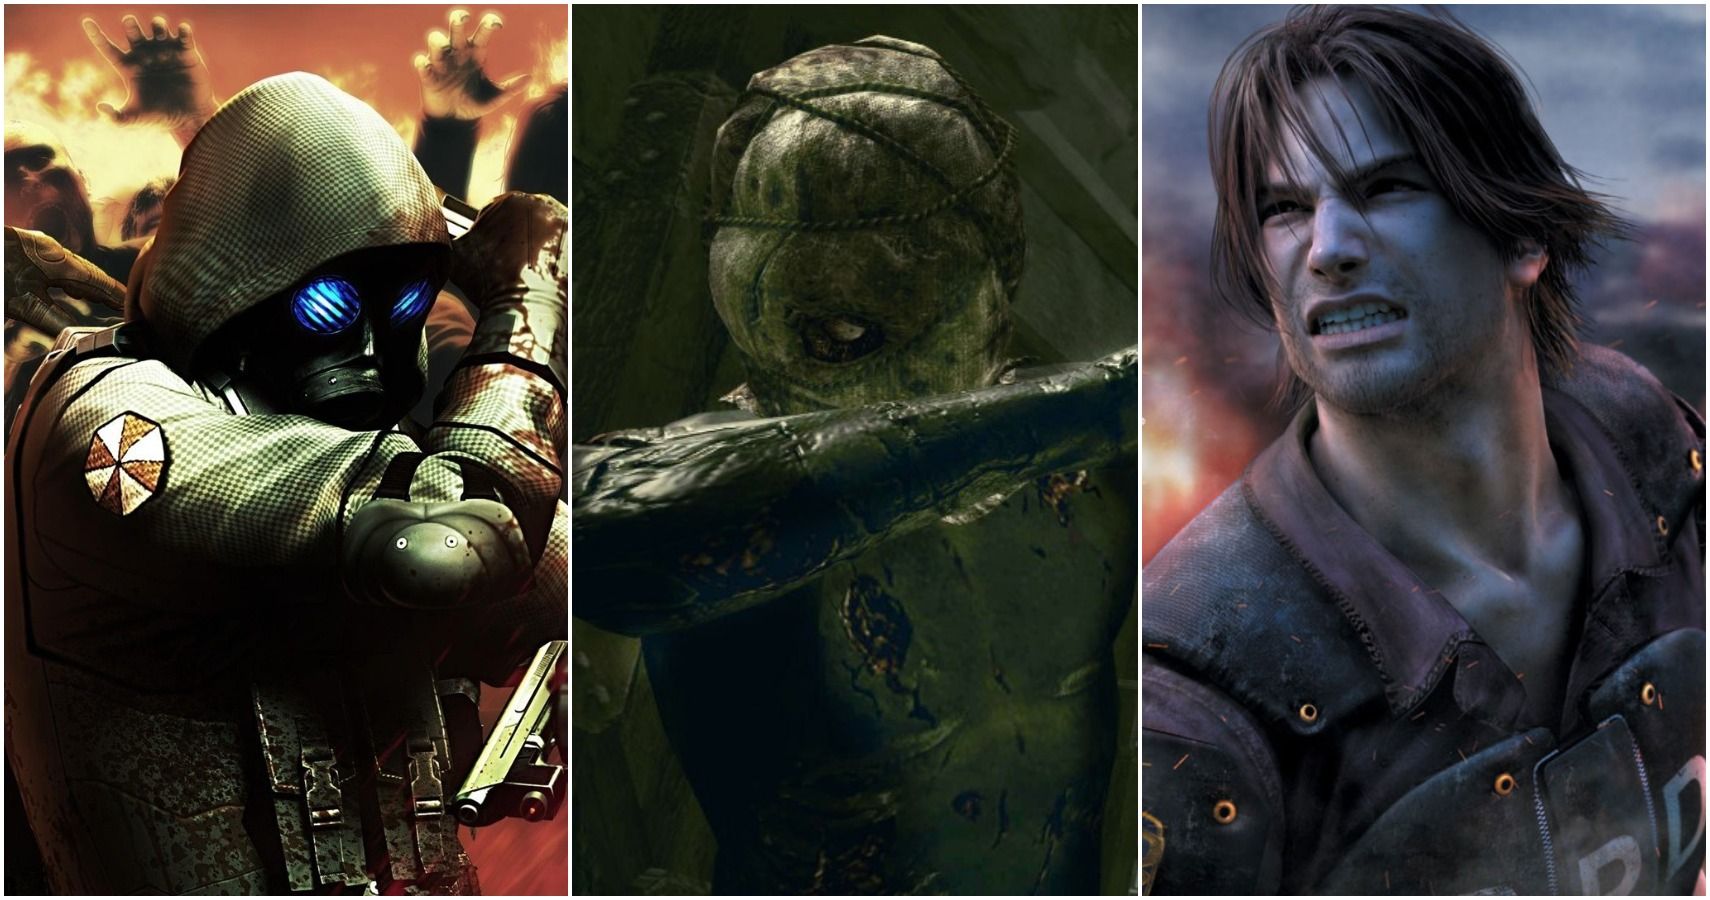 Resident Evil: 10 Unpopular Opinions About The Games, According To Reddit